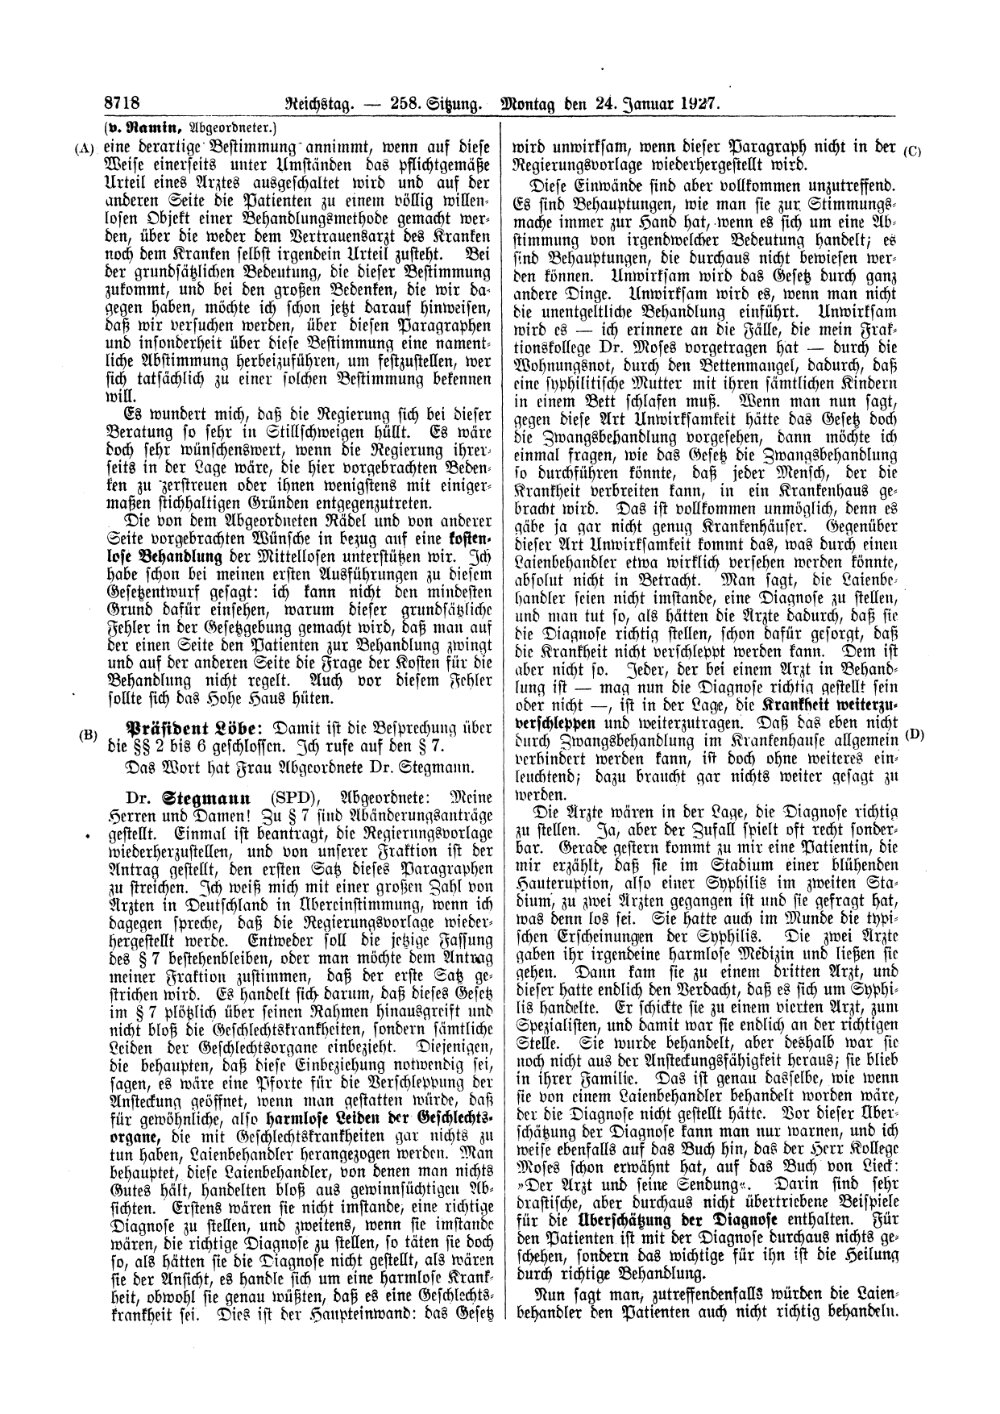 Scan of page 8718